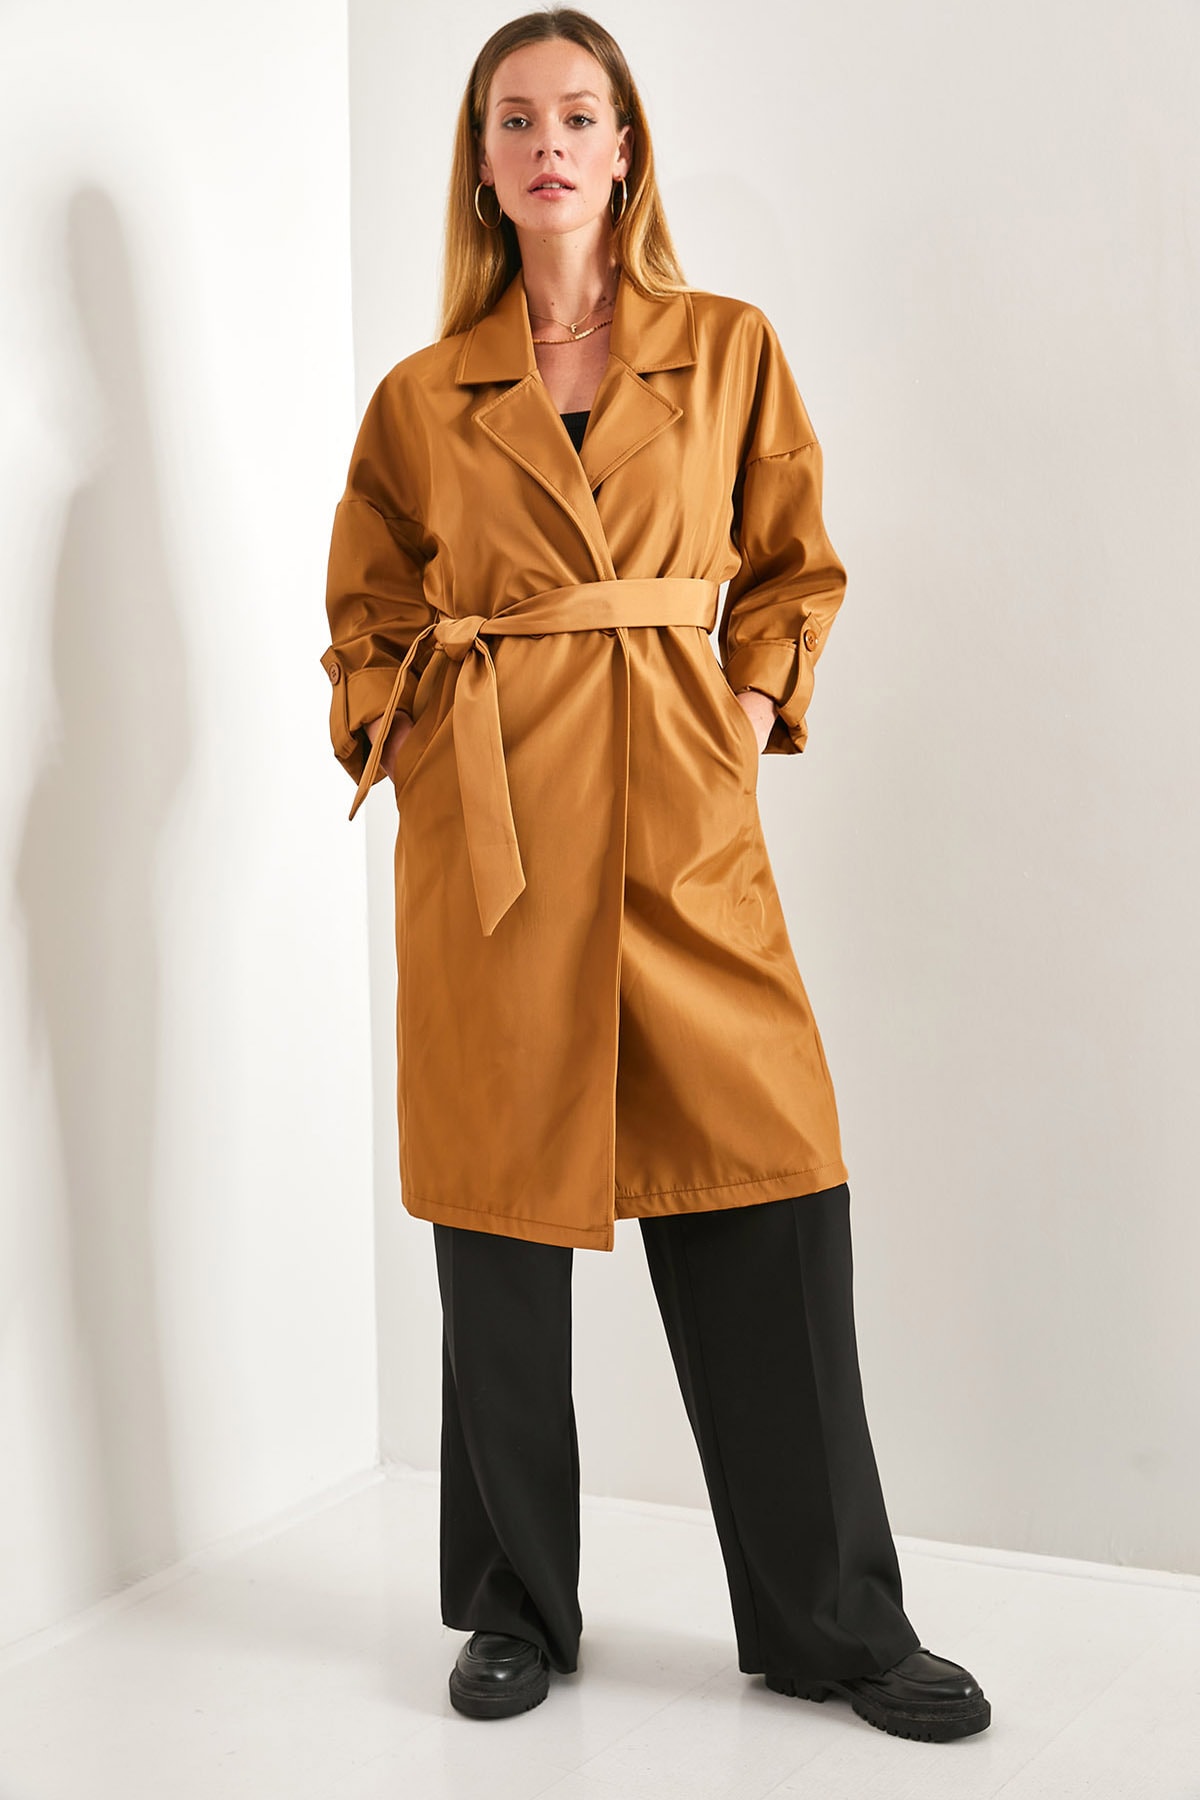 Bianco Lucci Women's Sleeve Folded Belted Trench Coat